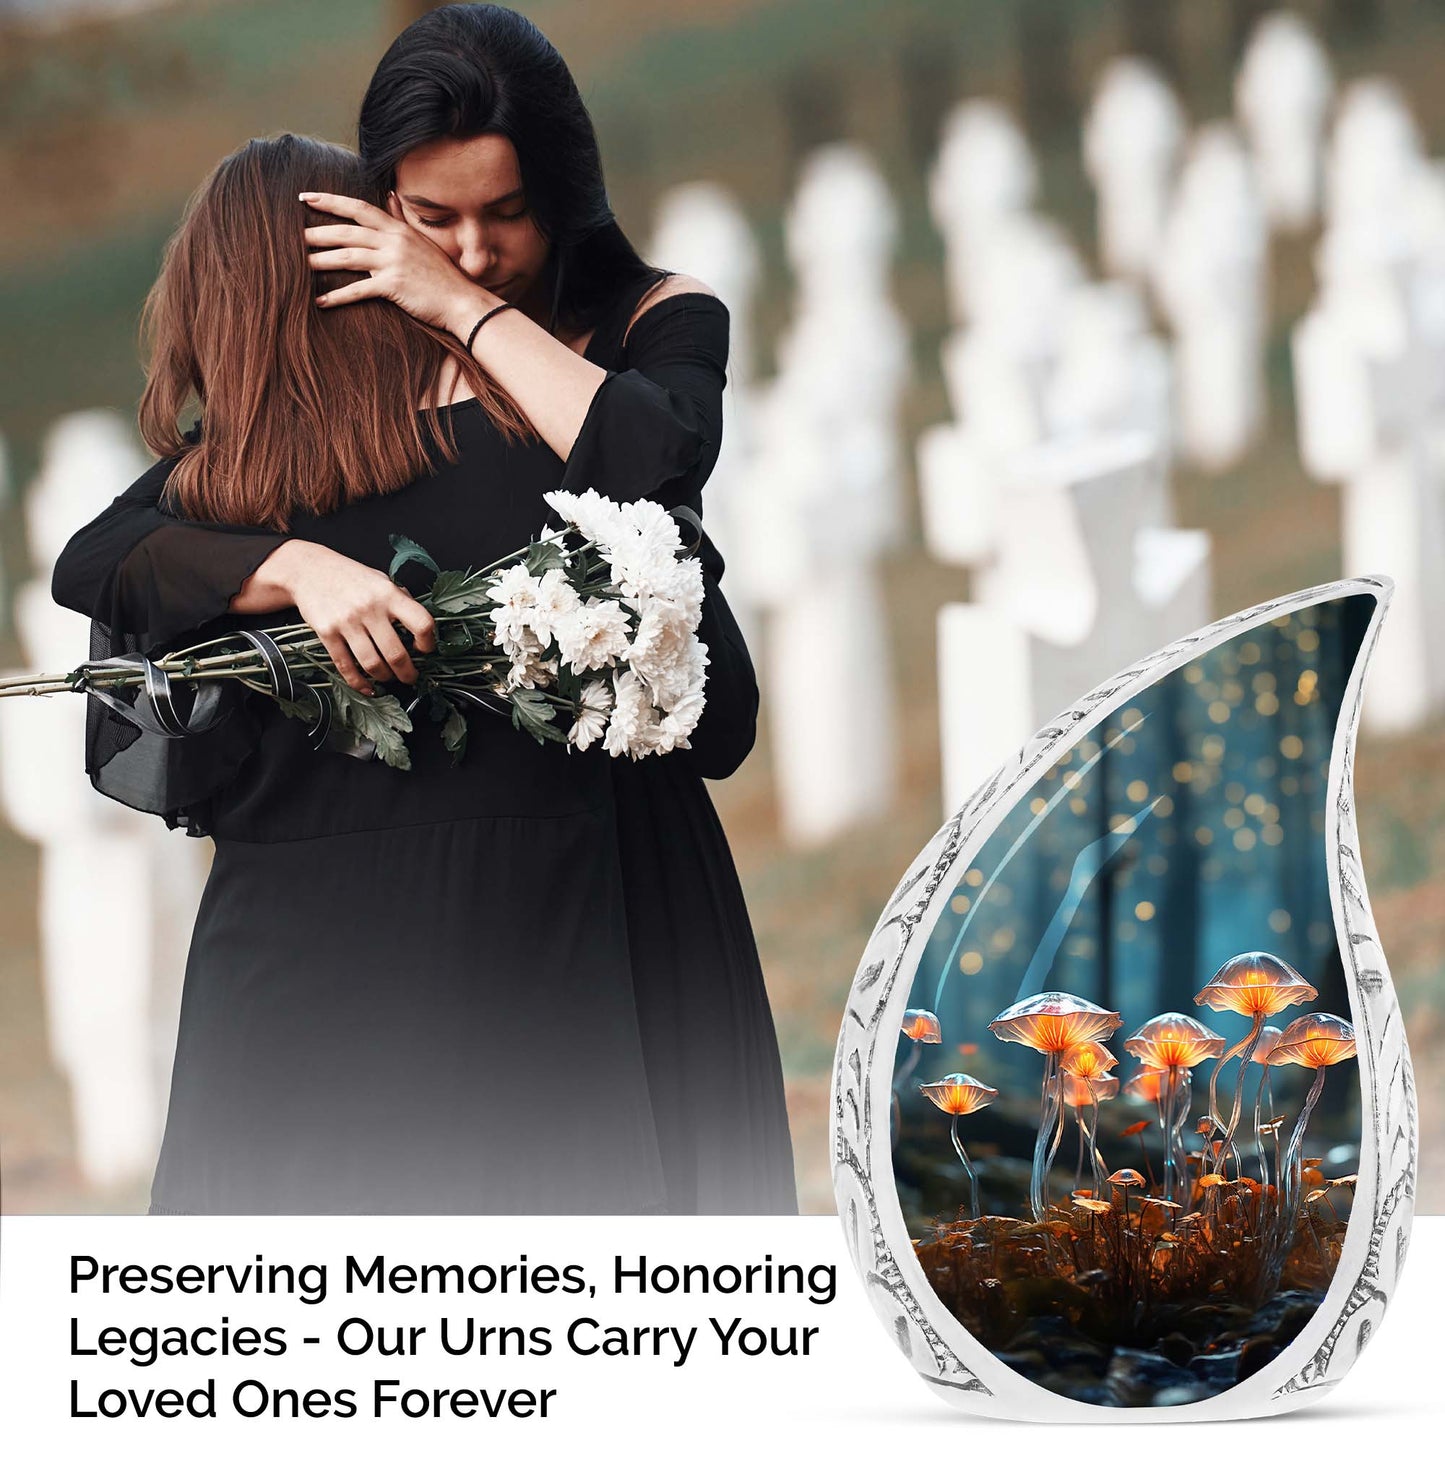 Unique lighting mushroom design on large cremation urns, ideal for adult men's ashes, exemplifying funeral and memorial urns